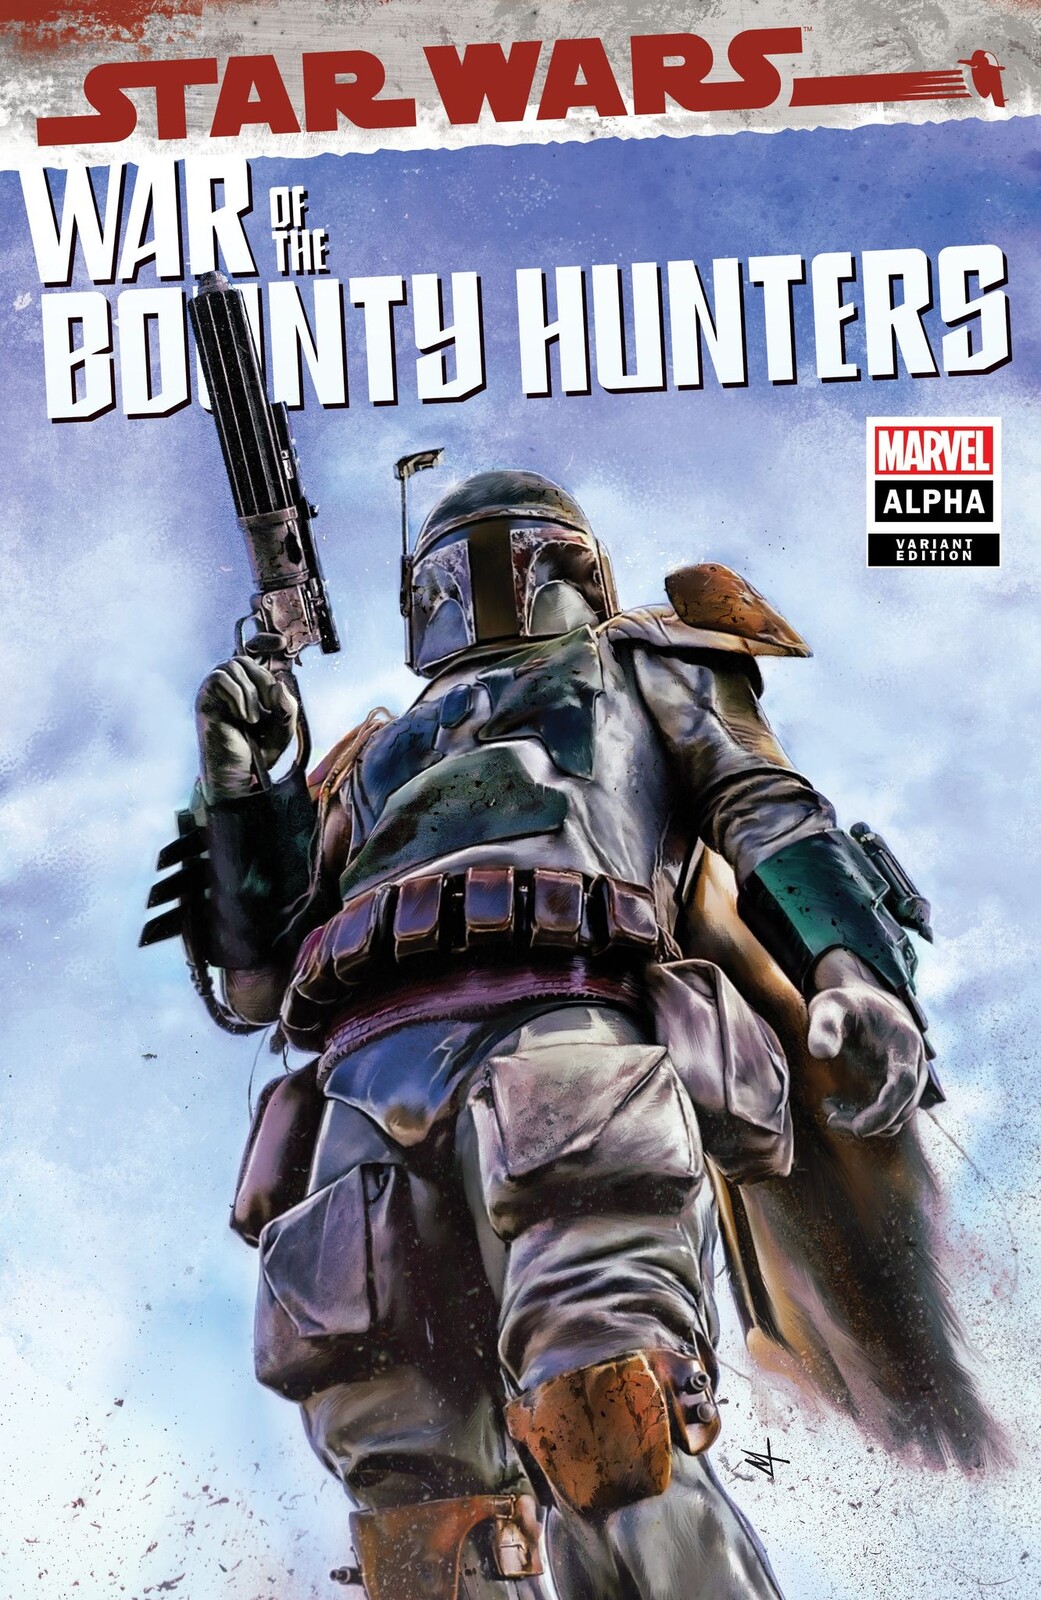 Star Wars - Wars of the Bounty Killers Cover